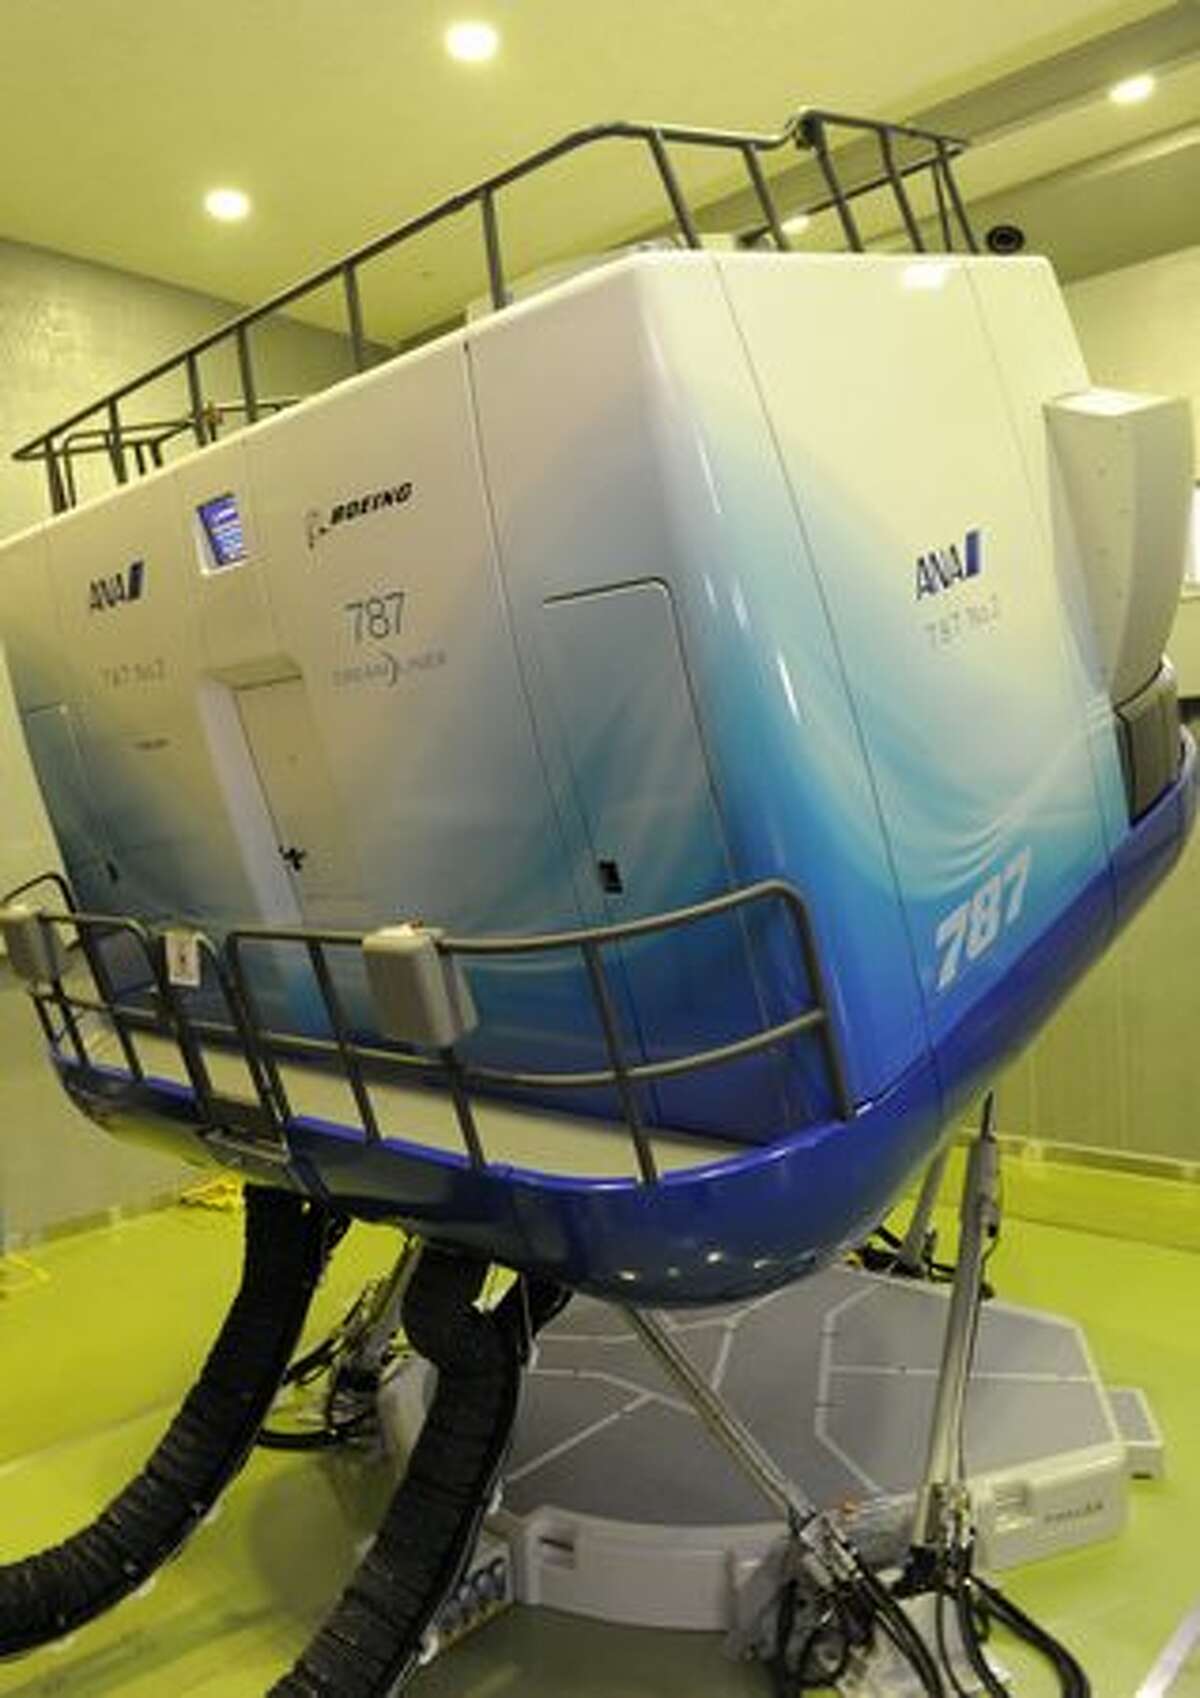 An All Nippon Airways flight simulator for Boeing's 787 Deamliner is displayed at ANA's training center near Tokyo's Haneda airport.